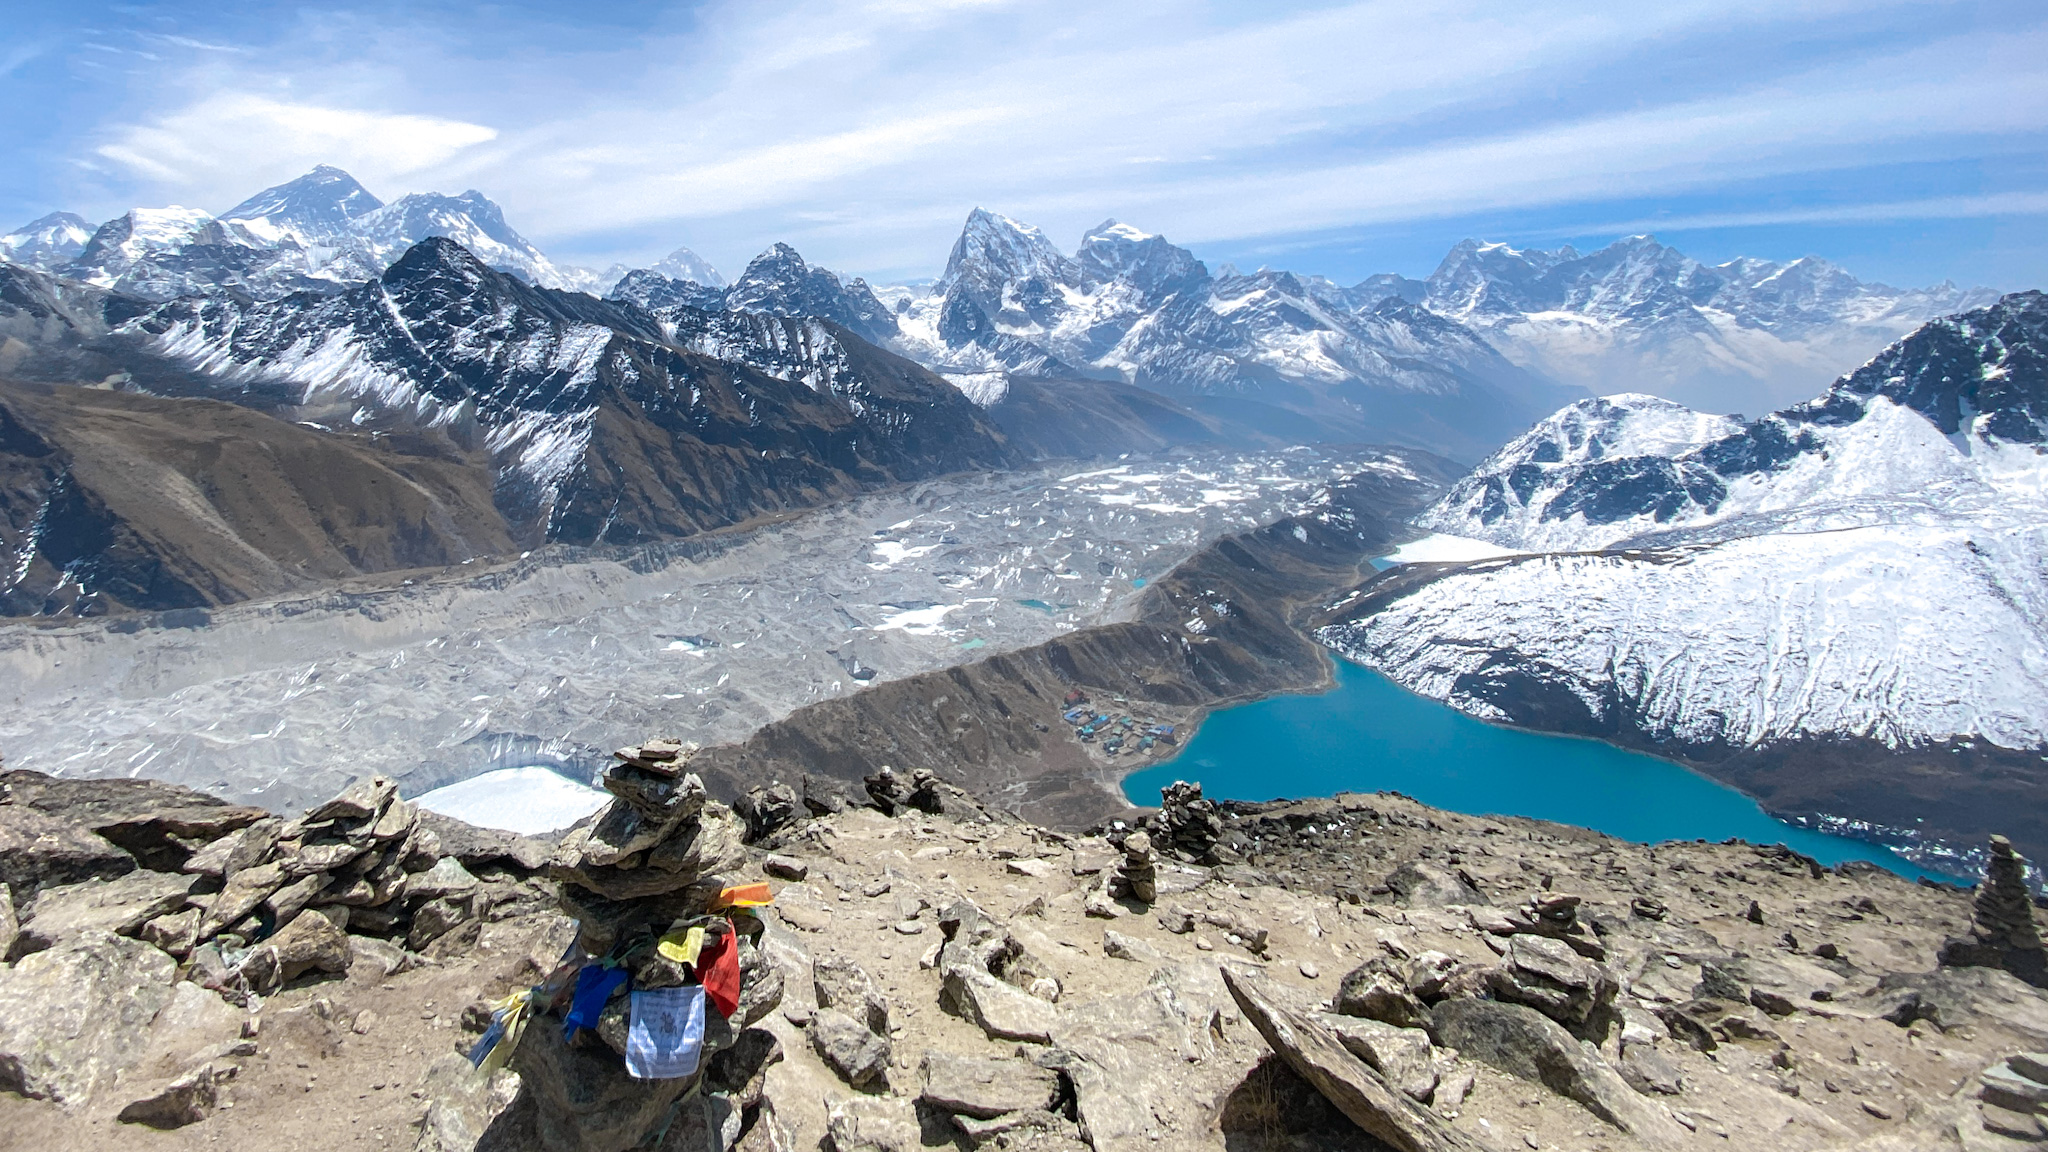 View from Gokyo lake